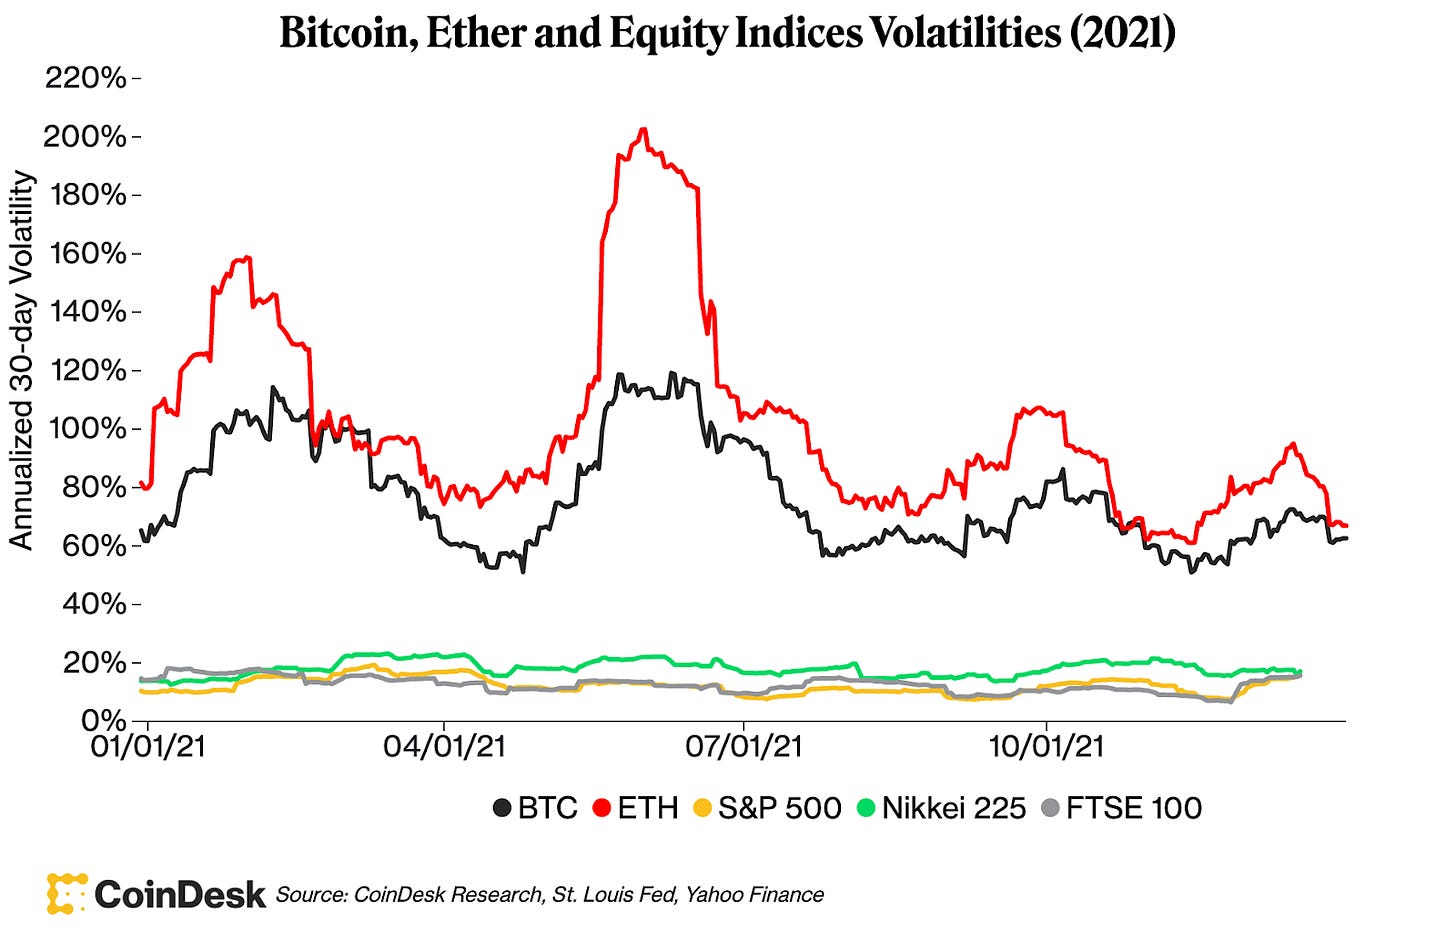 Bitcoin, Ether and Equity Indices Volatilities (2021)